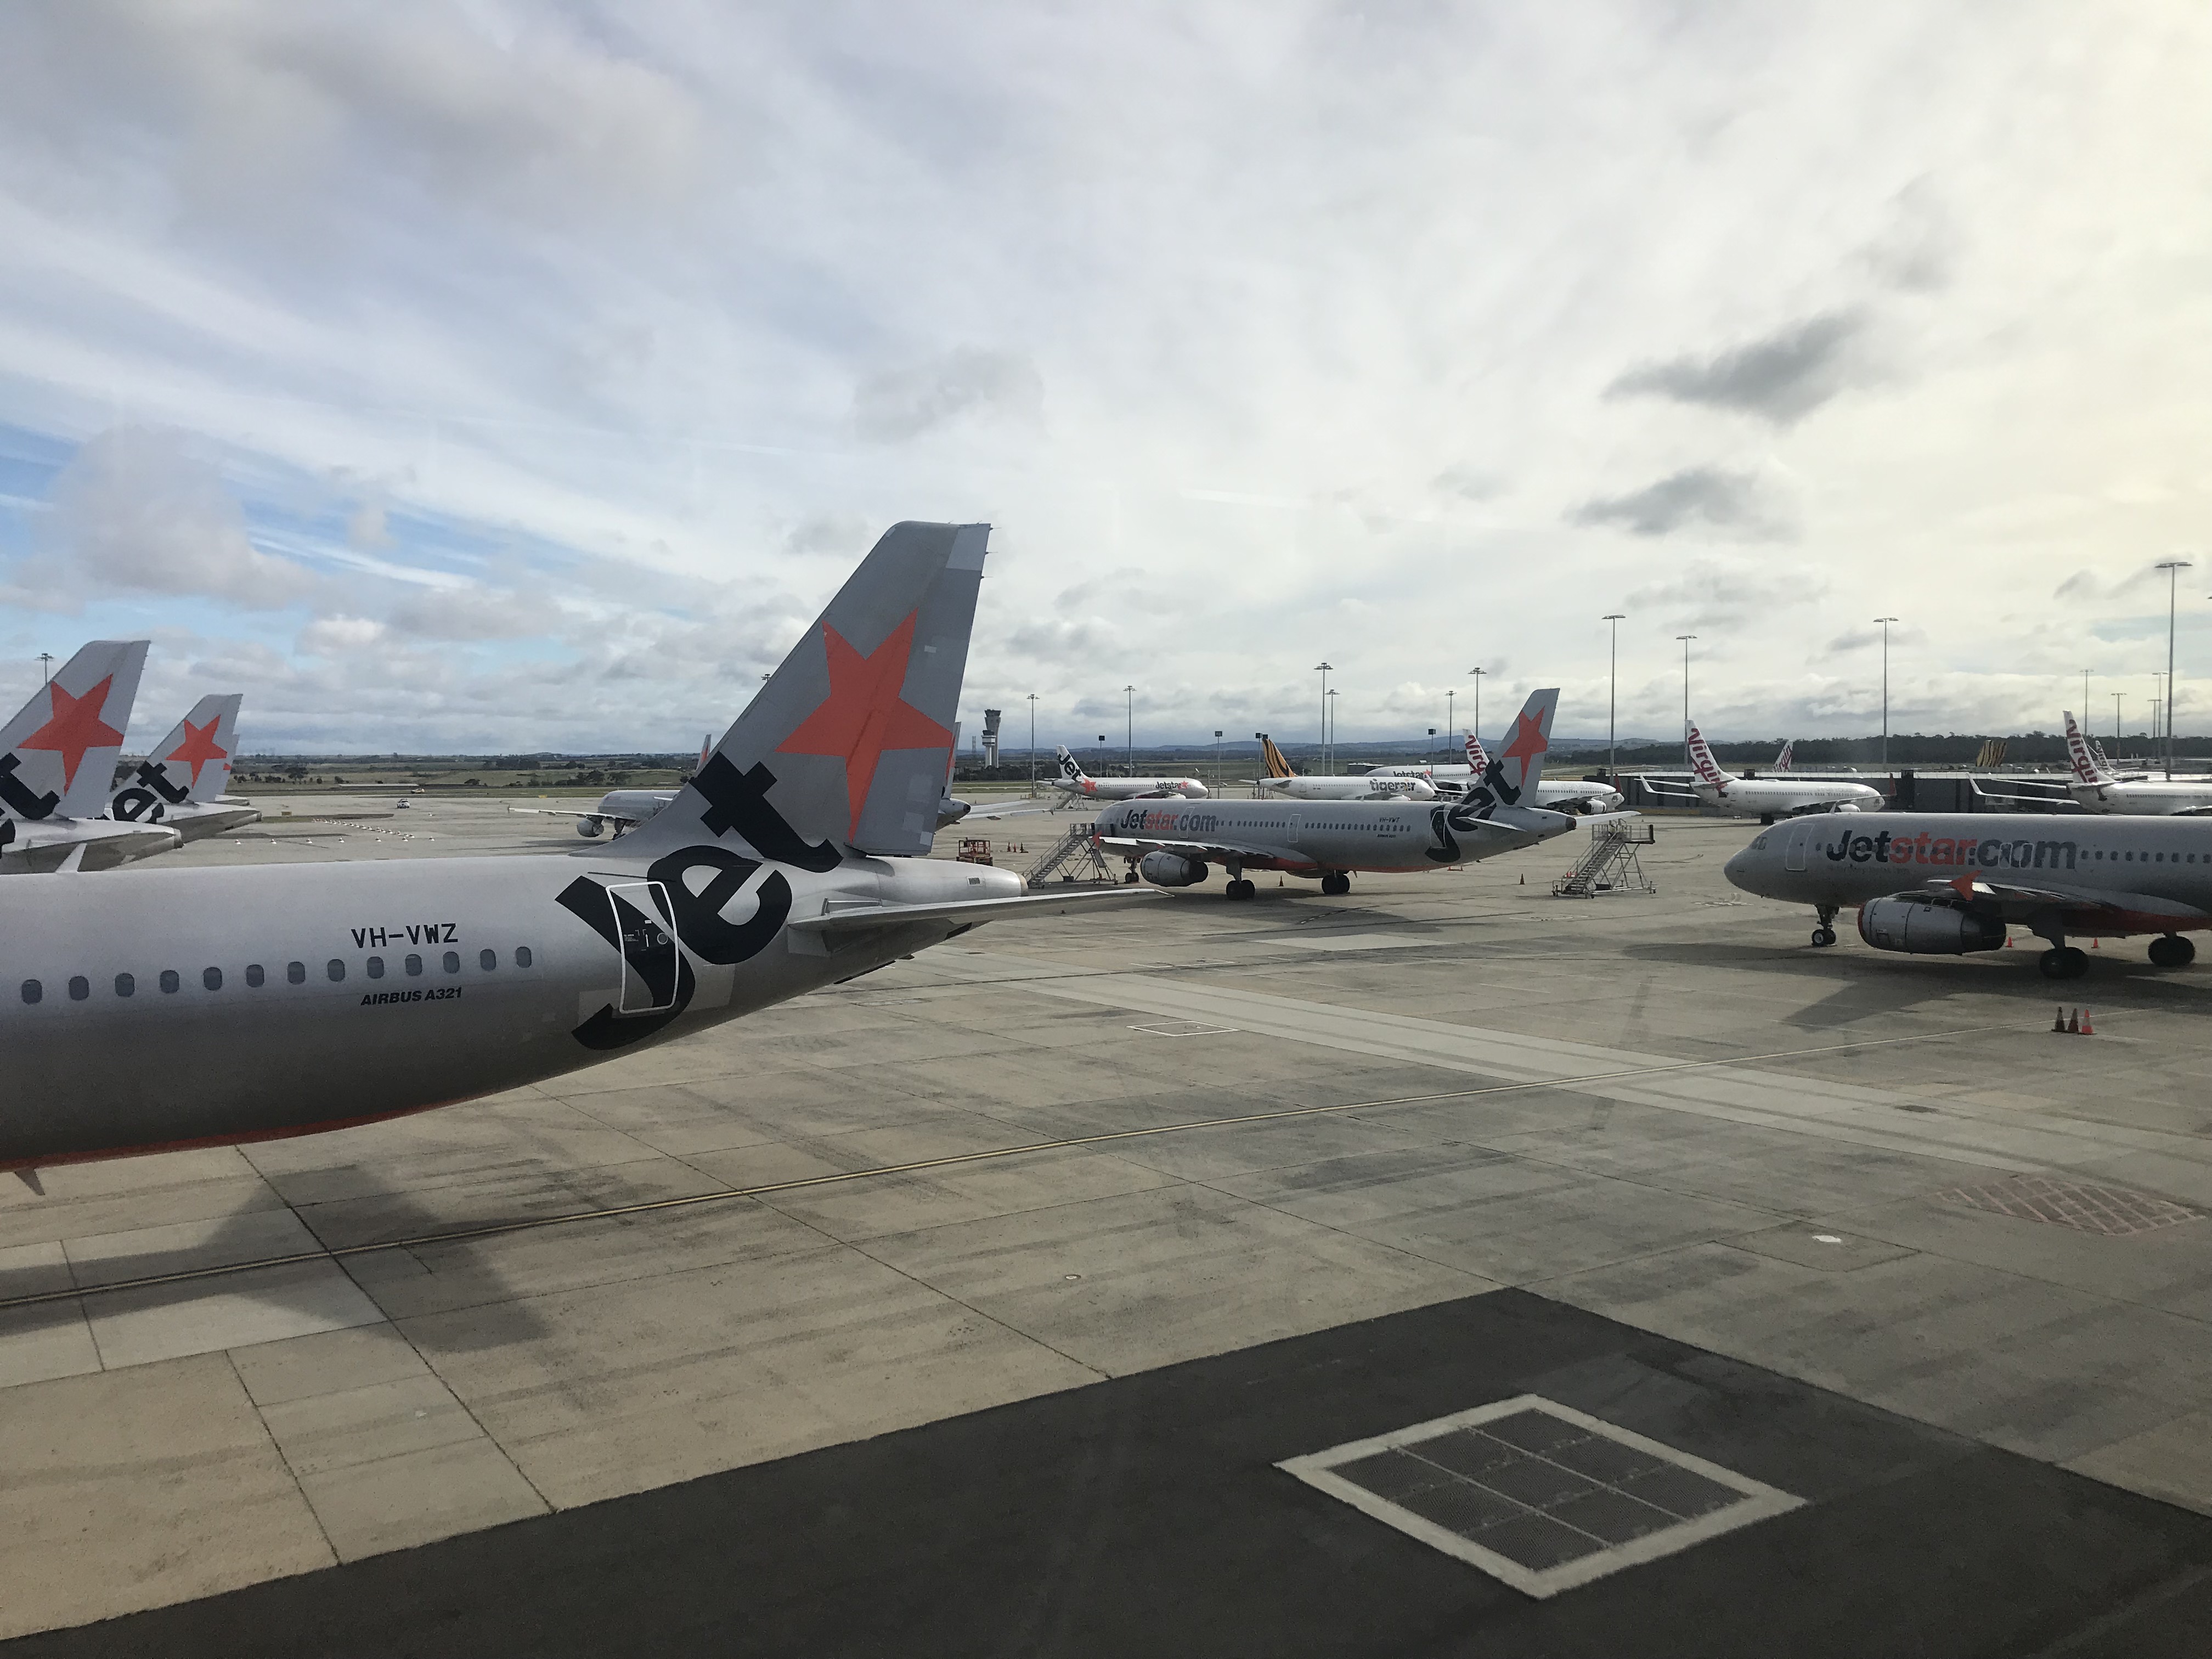 Josh Dye photos of Jetstar and Virgin Australia flights from Sydney to Melbourne and back. Experience in airports and on board during new hygiene policies after COVID-19 outbreak Tue, 16. June 2020